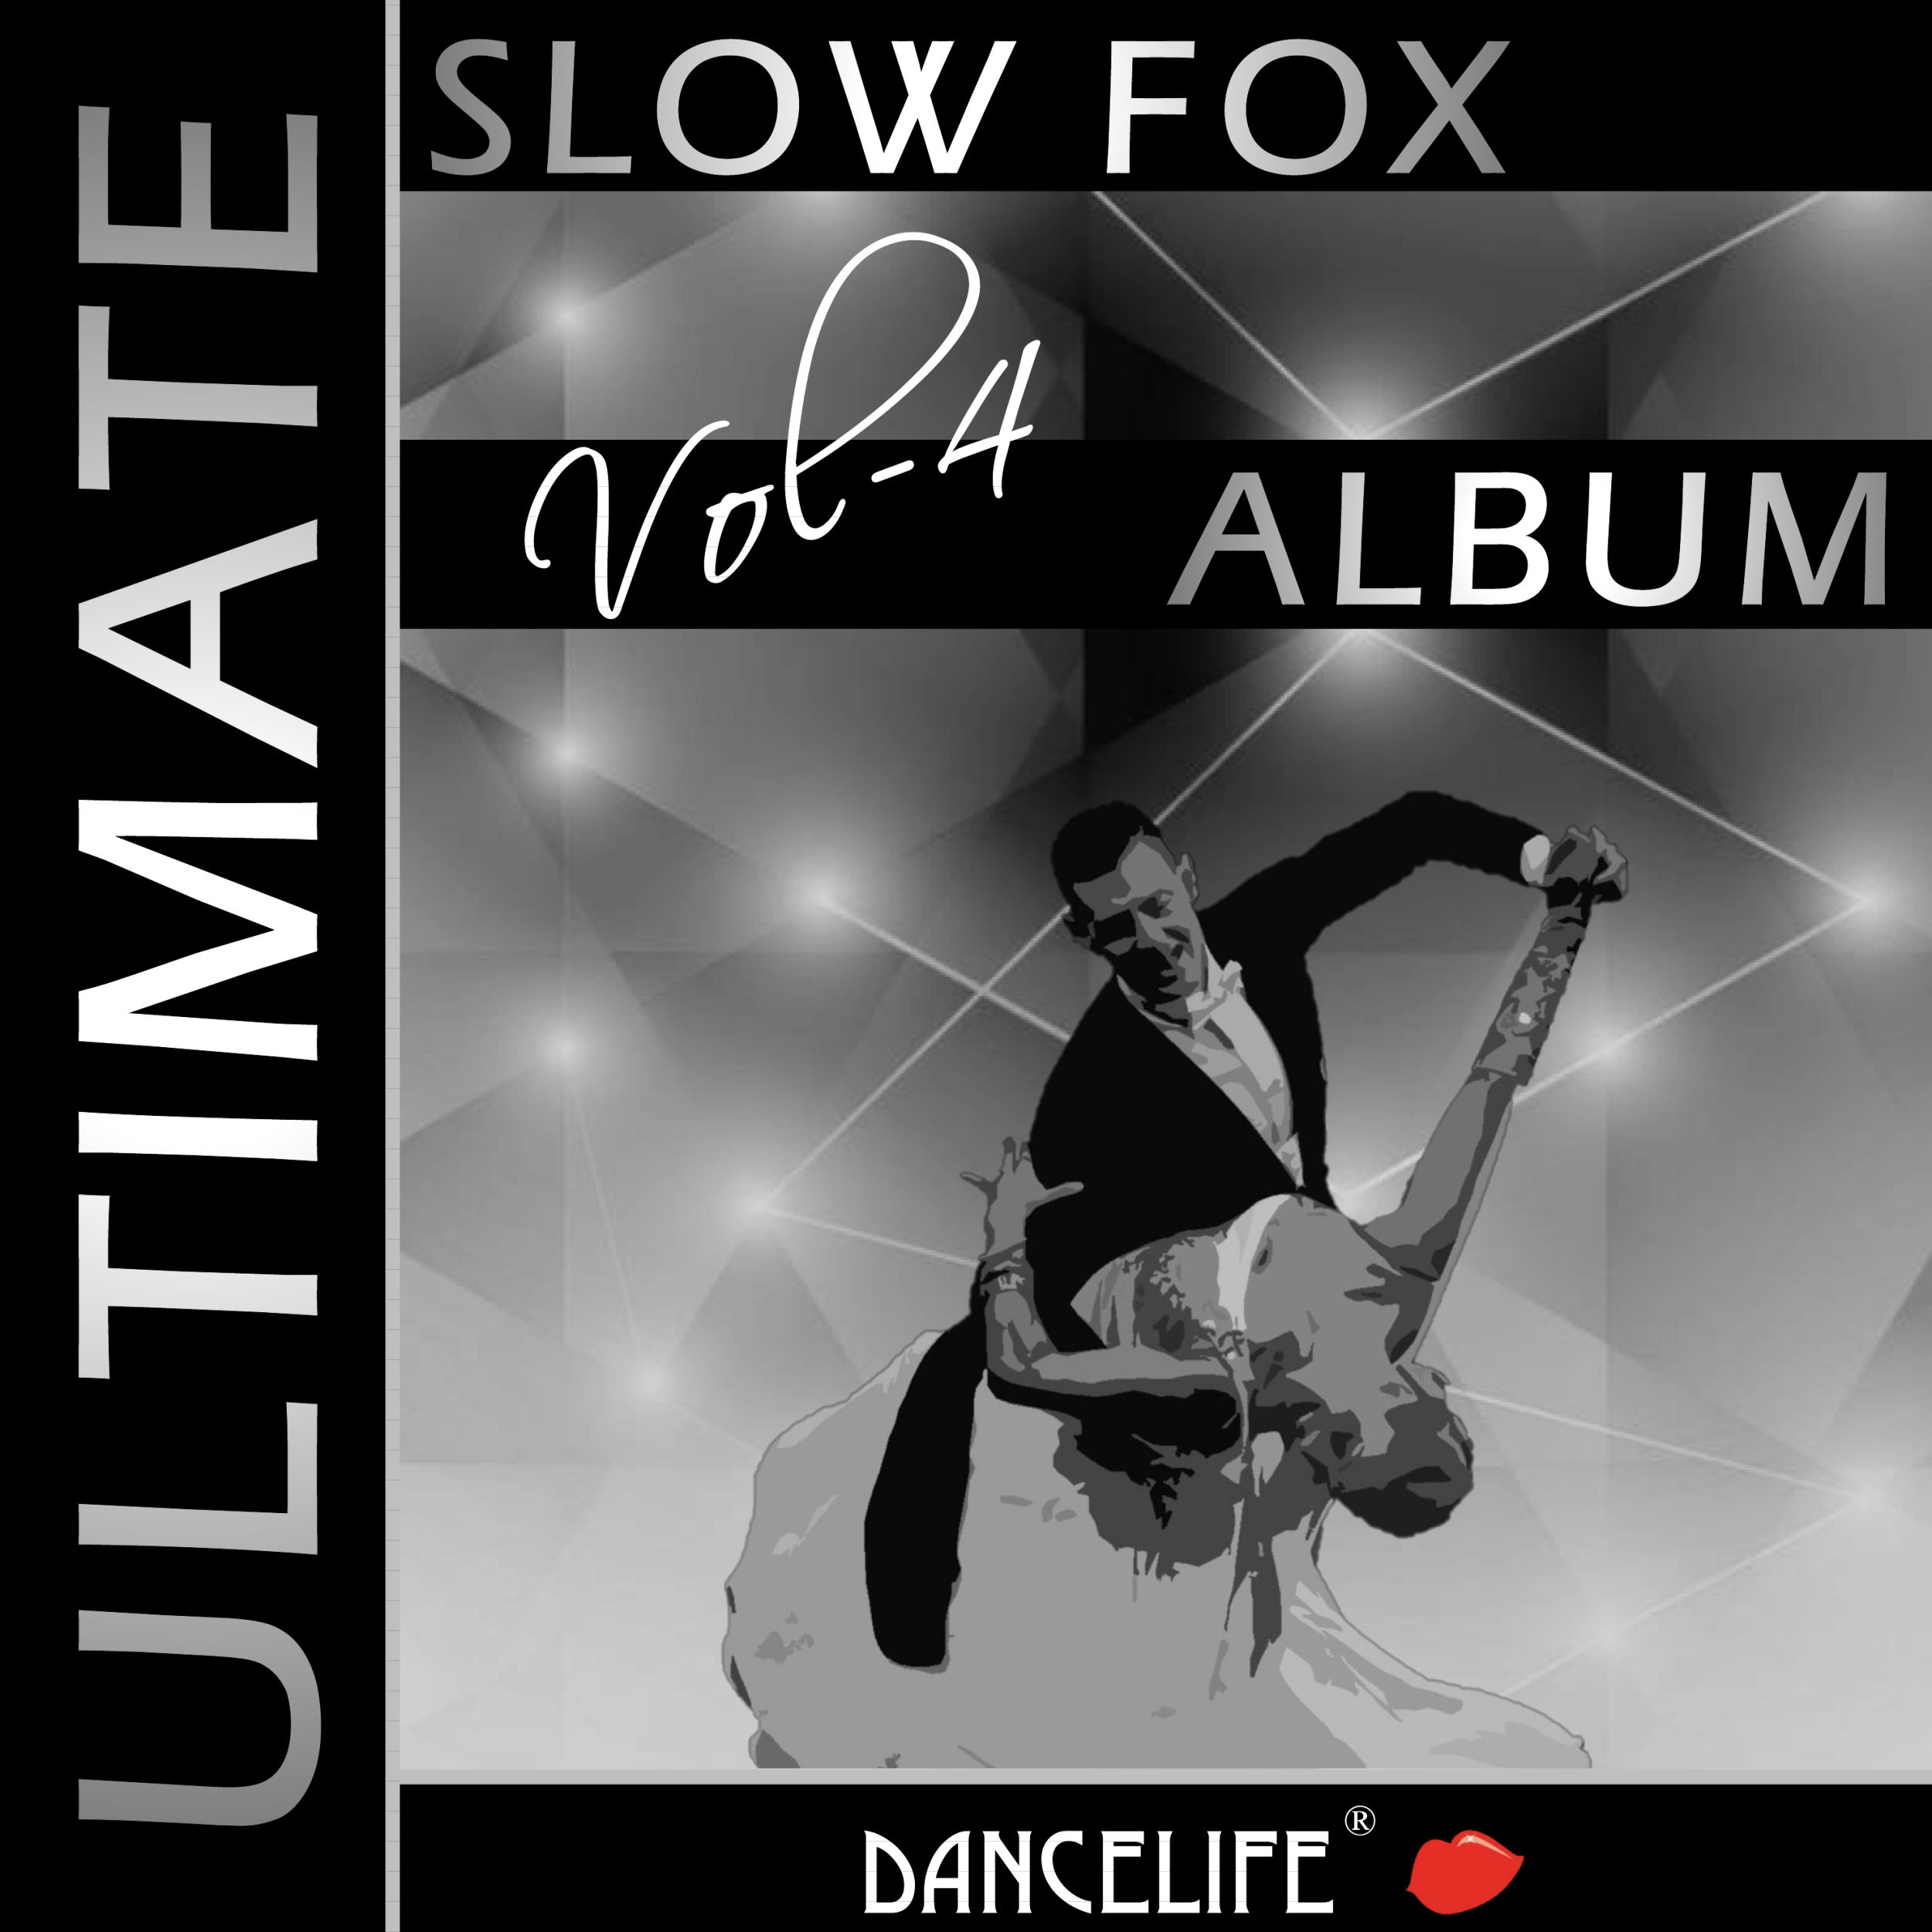 The Things We Do for Love (Slow Fox / 29 Bpm)